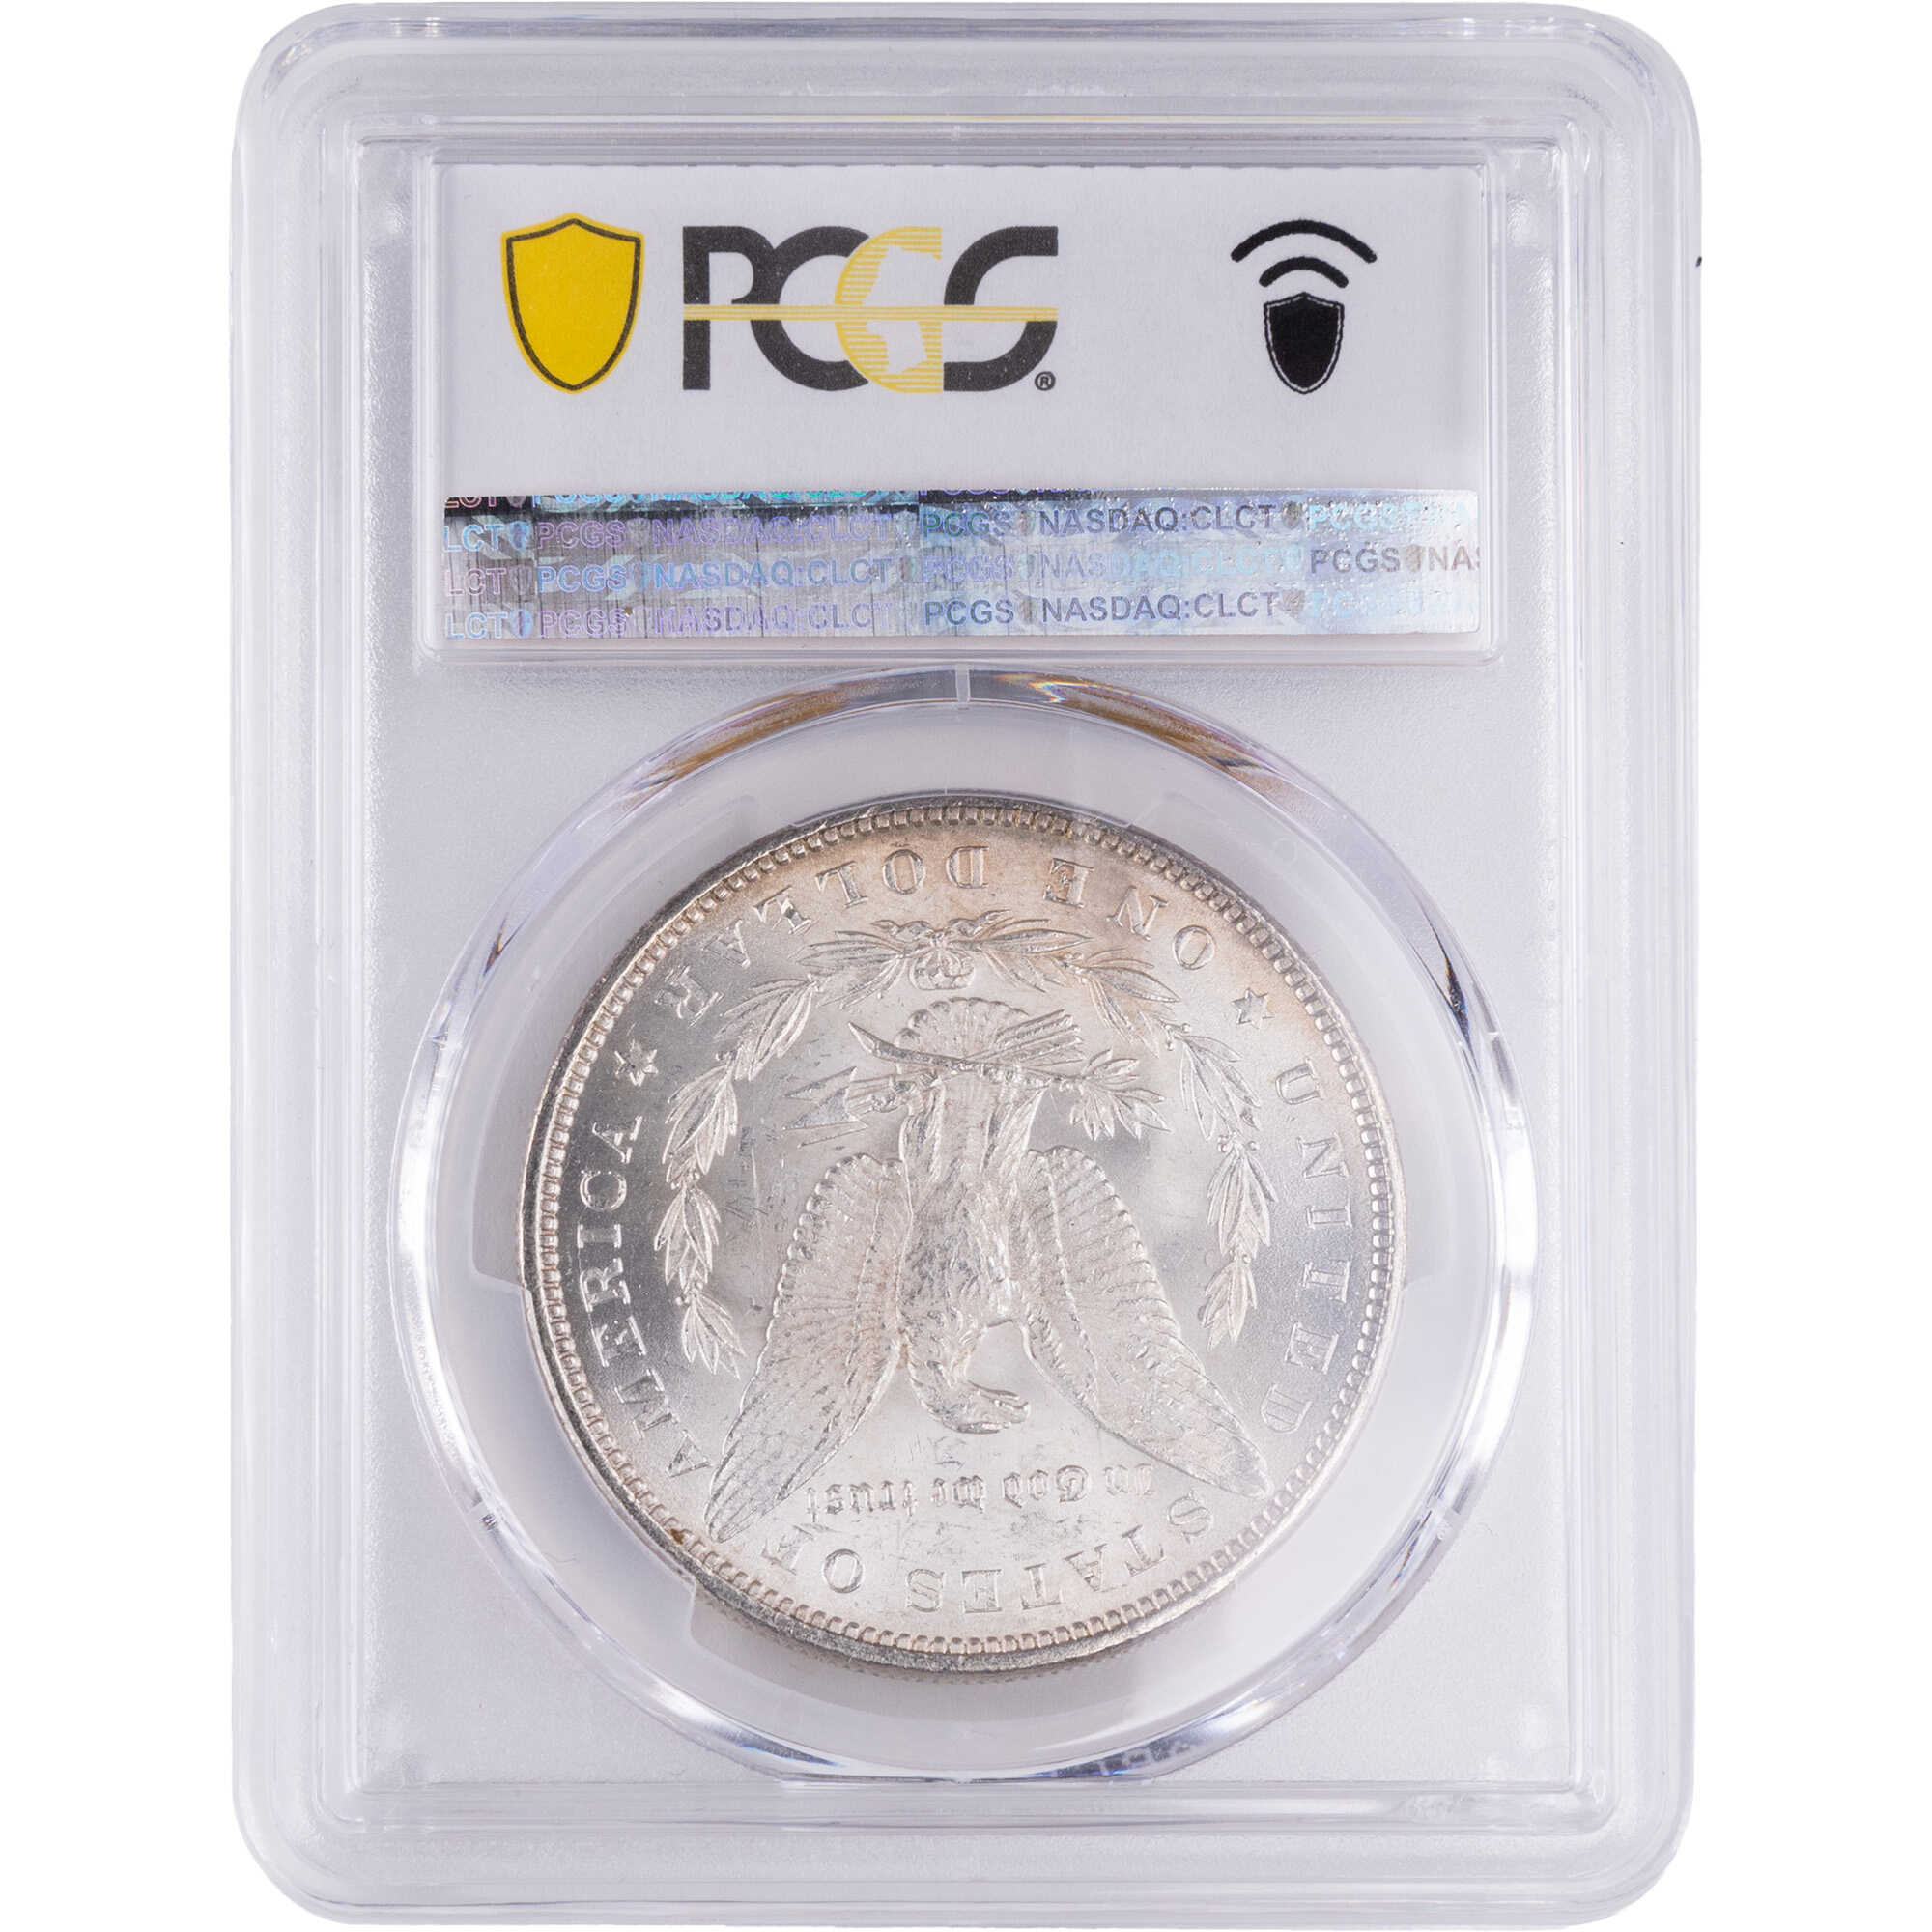 1883 Morgan Dollar MS 64 PCGS Silver $1 Uncirculated Coin SKU:CPC12860 - Morgan coin - Morgan silver dollar - Morgan silver dollar for sale - Profile Coins &amp; Collectibles